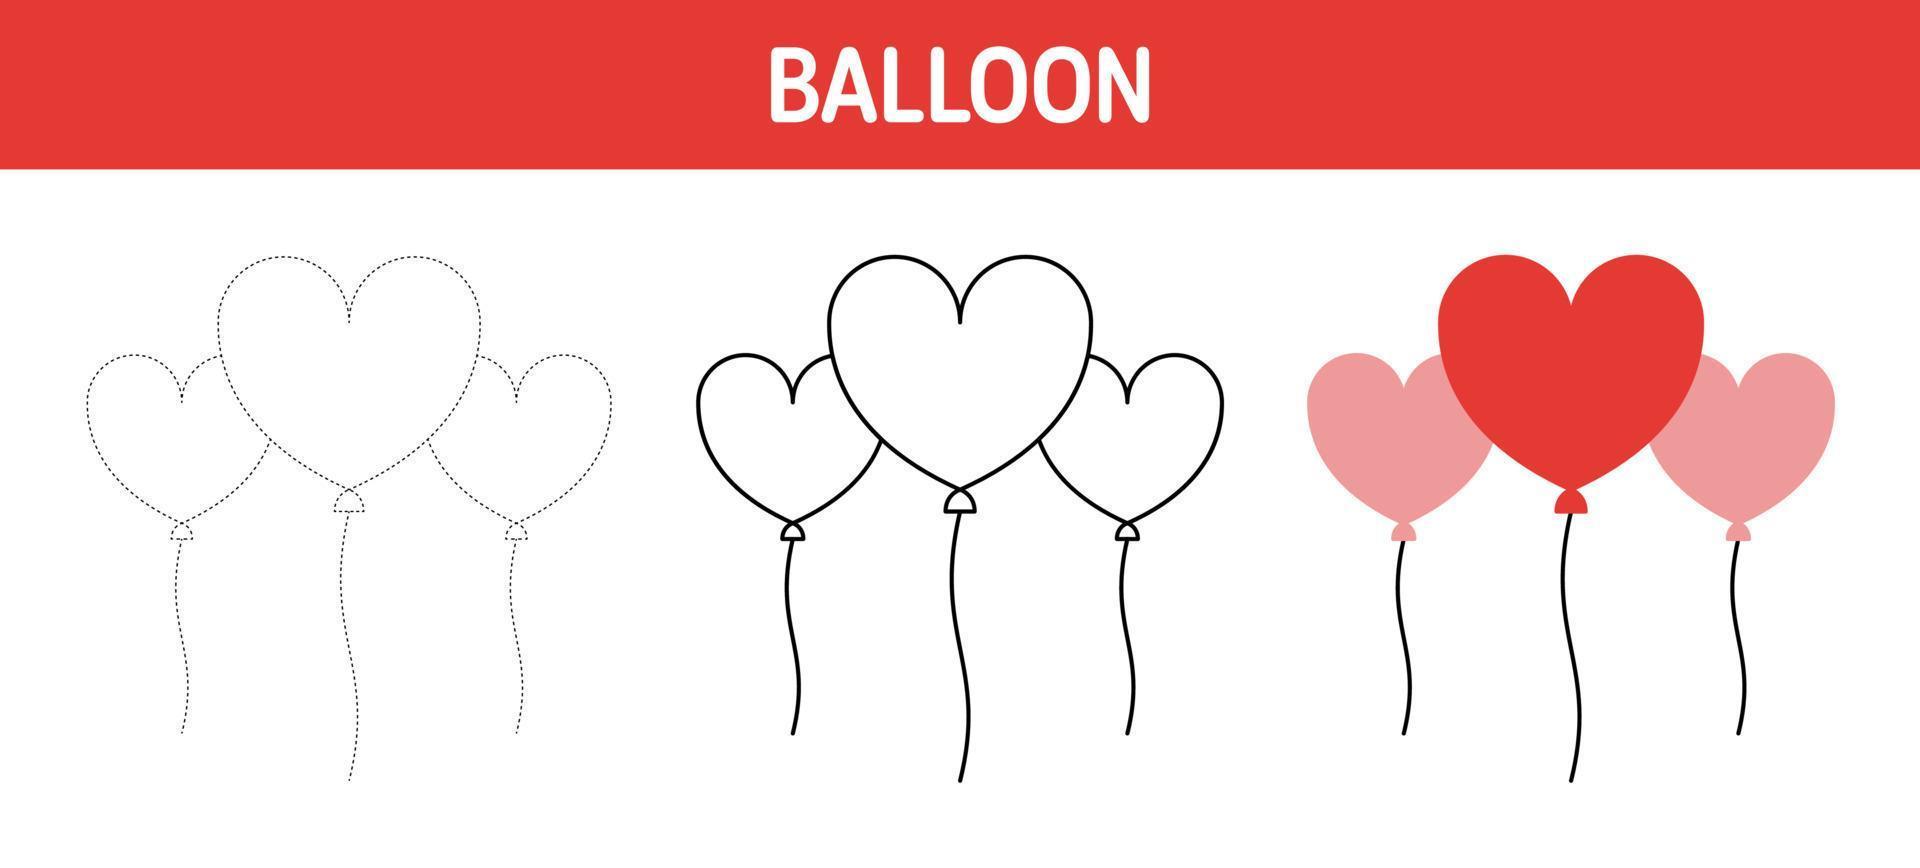 Balloon tracing and coloring worksheet for kids vector